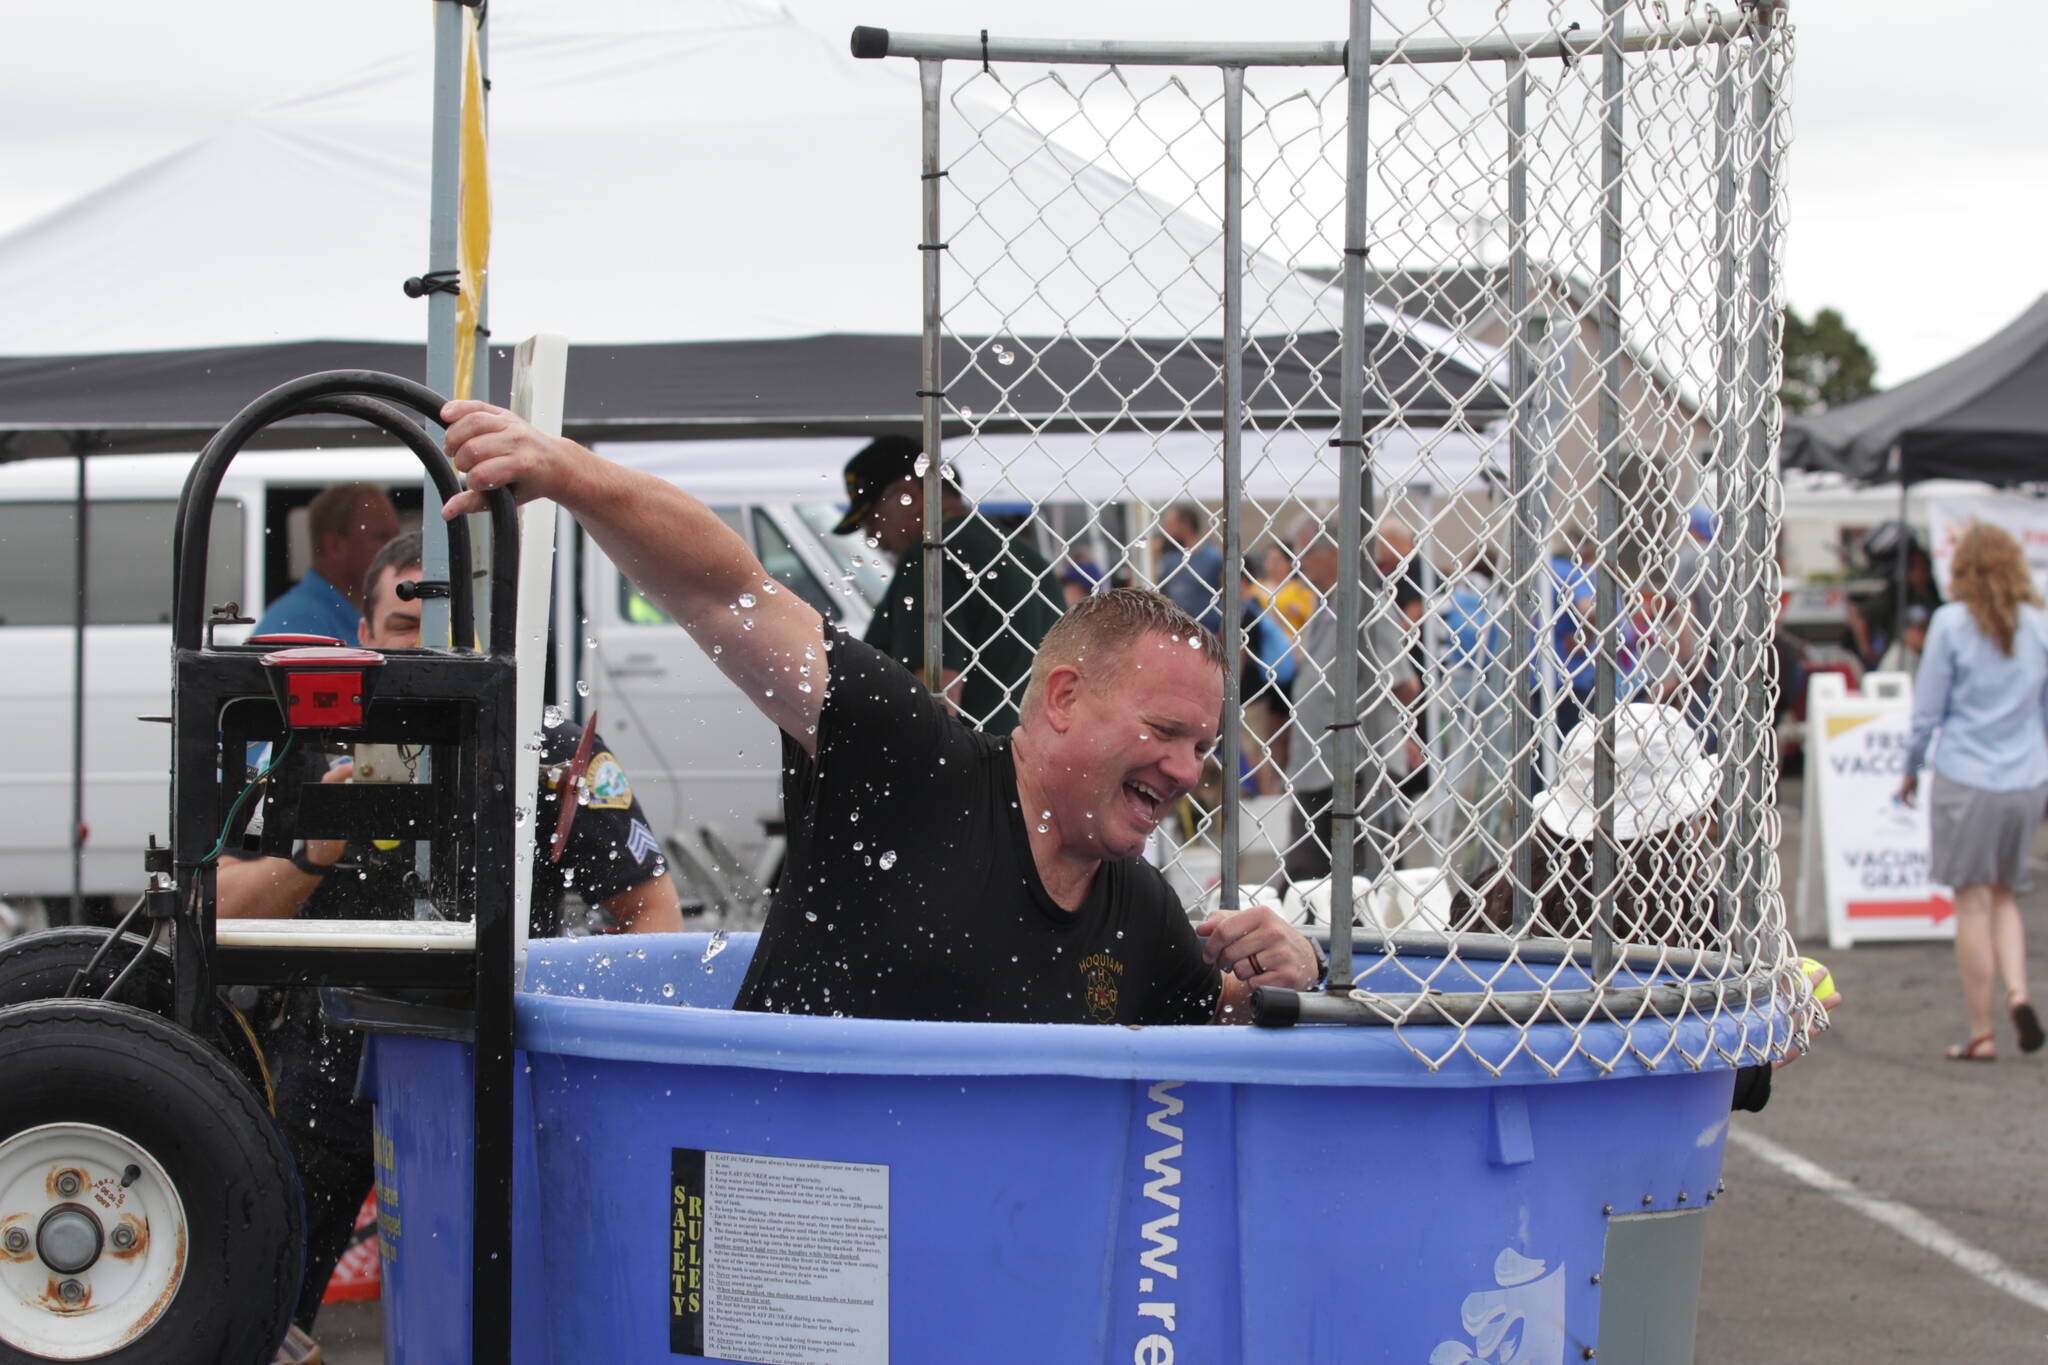 Hoquiam Fire Chief Matt Miller gets dunked during the county’s Emergency Preparedness Expo on July 22. (Michael S. Lockett / The Daily World)